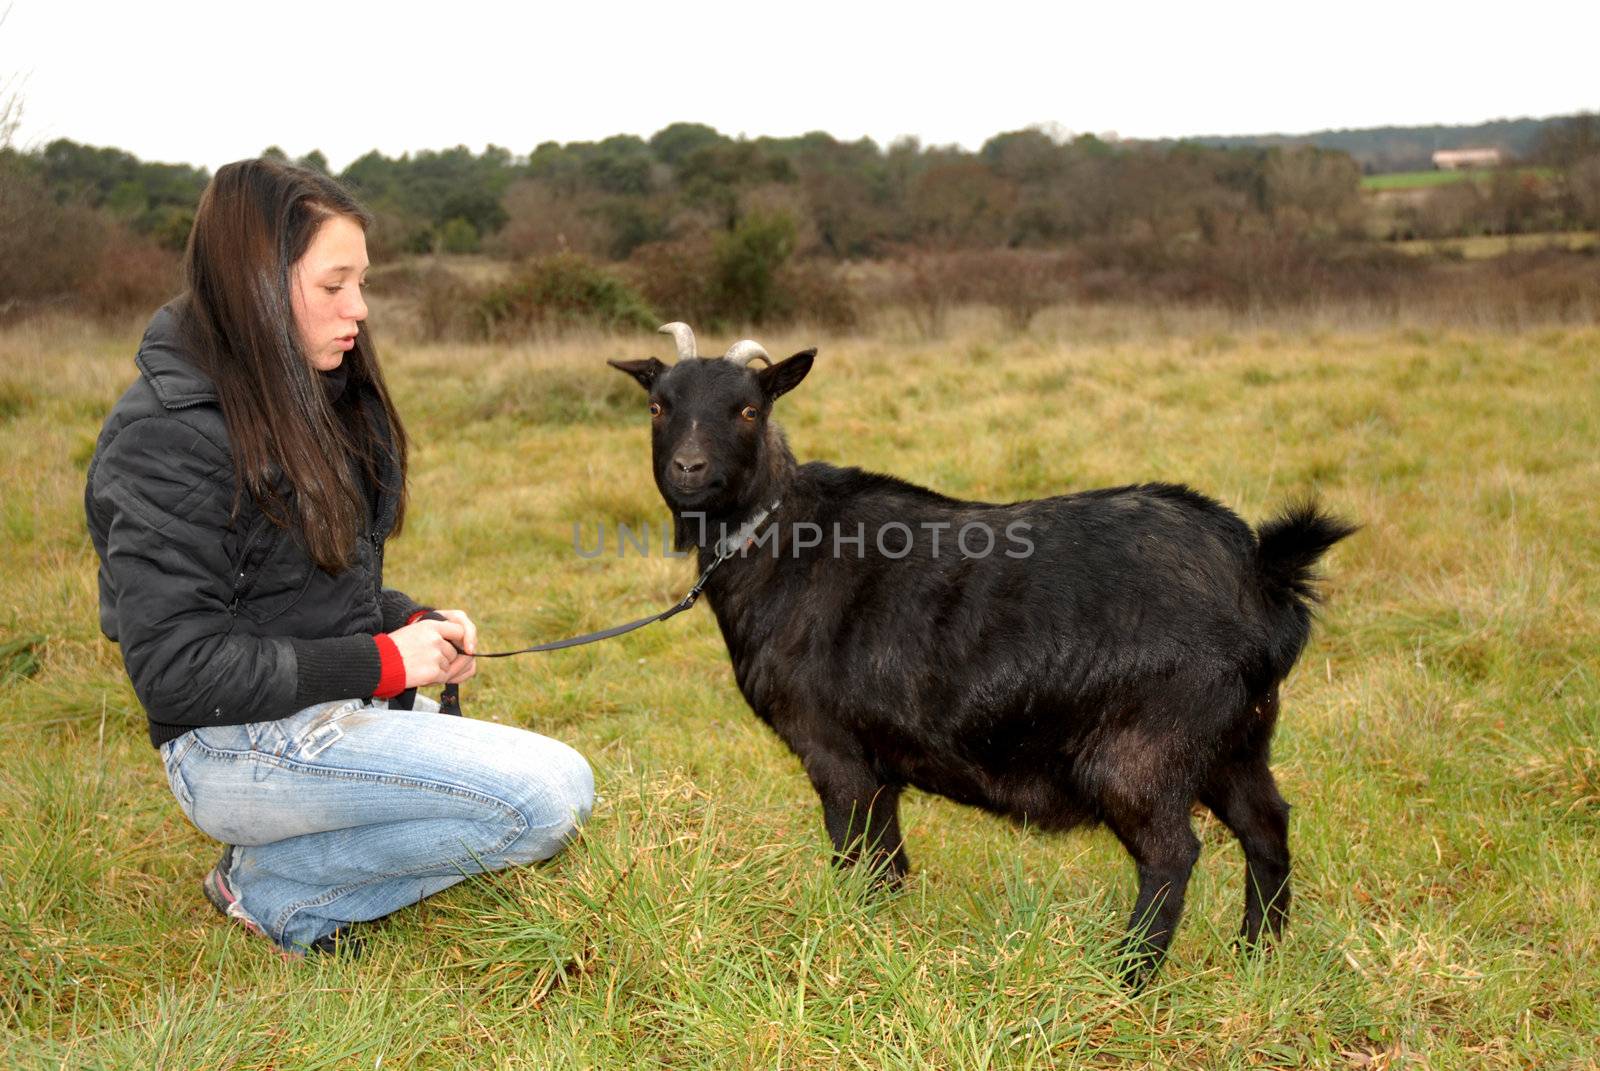 young teenager and a black miniature goat in a field